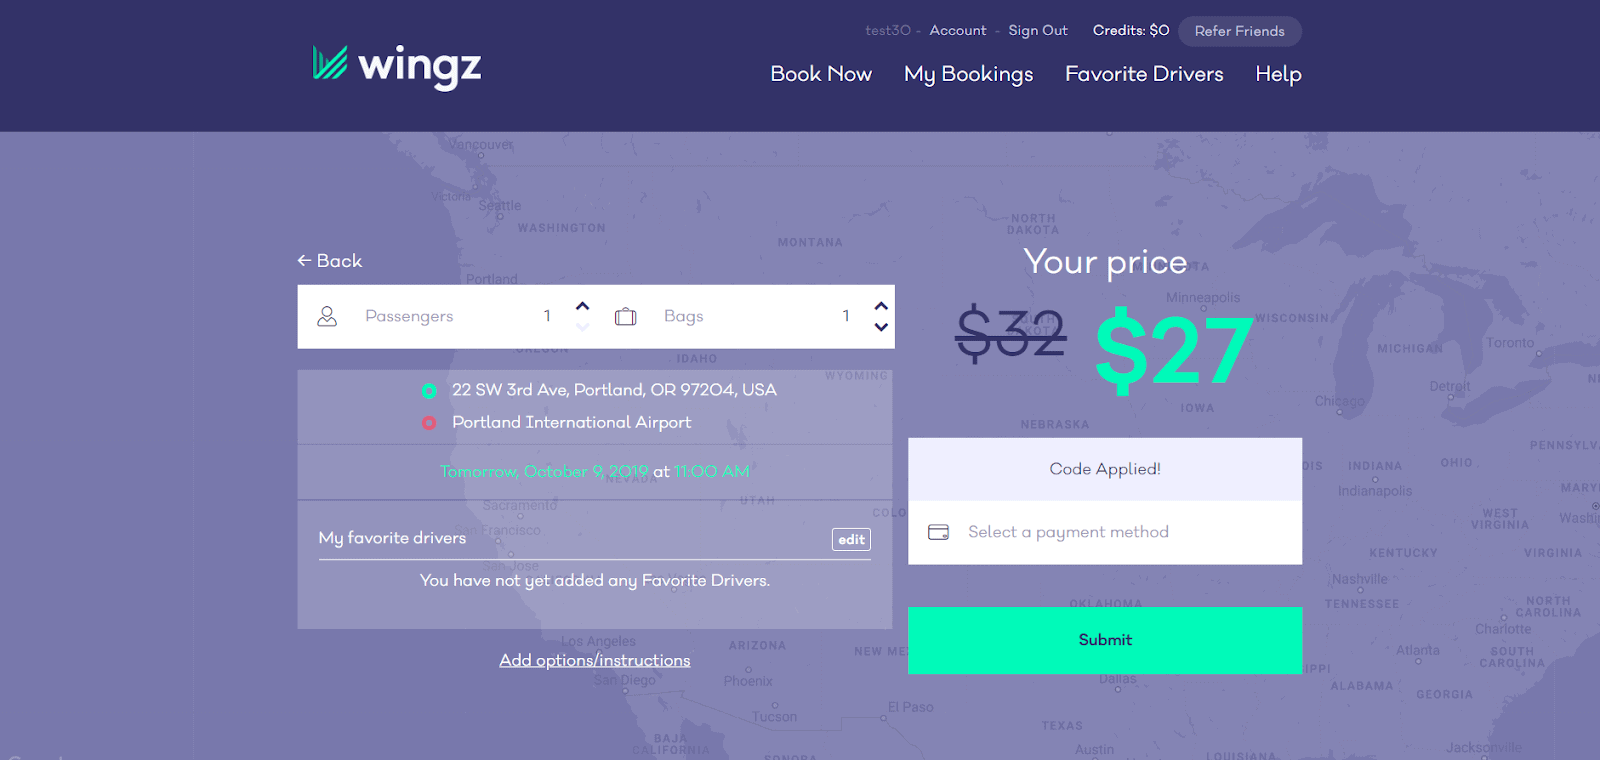 Wingz homepage